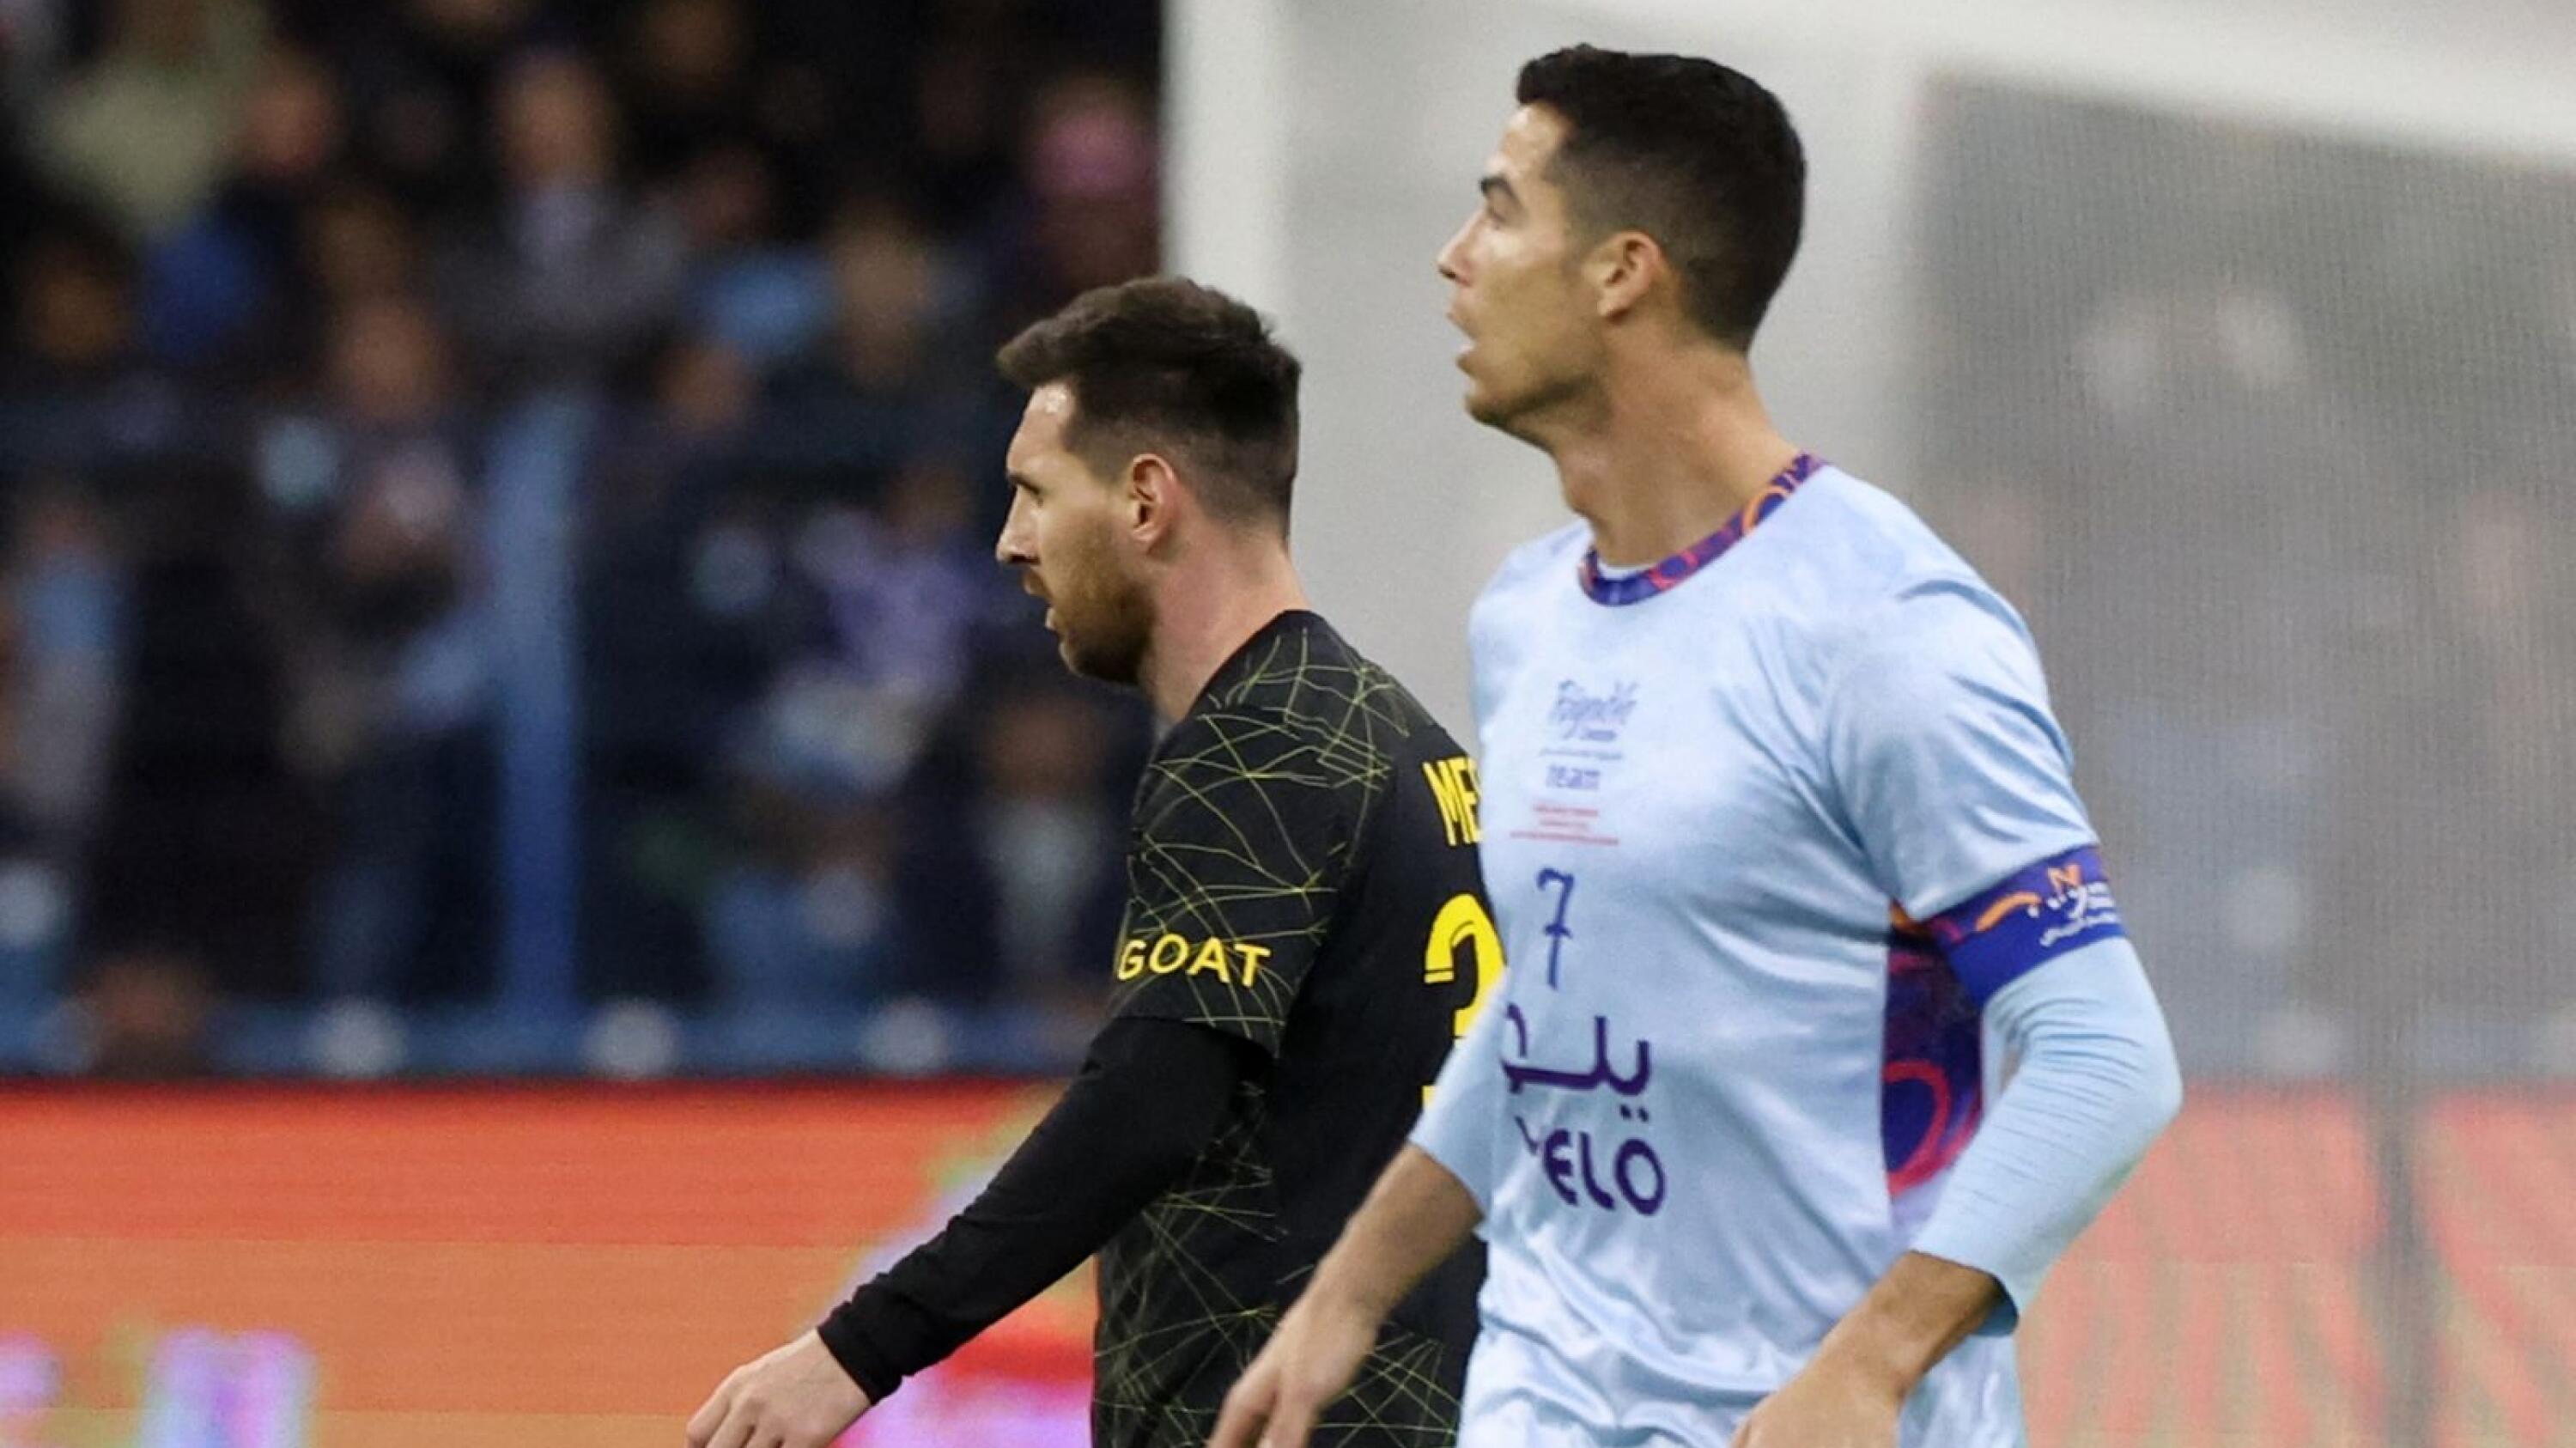 Paris Saint-Germain's Lionel Messi and Riyadh All-Star's Cristiano Ronaldo are pictured on the pitch during the Riyadh Season Cup football match at the King Fahd Stadium in Riyadh on Thurday